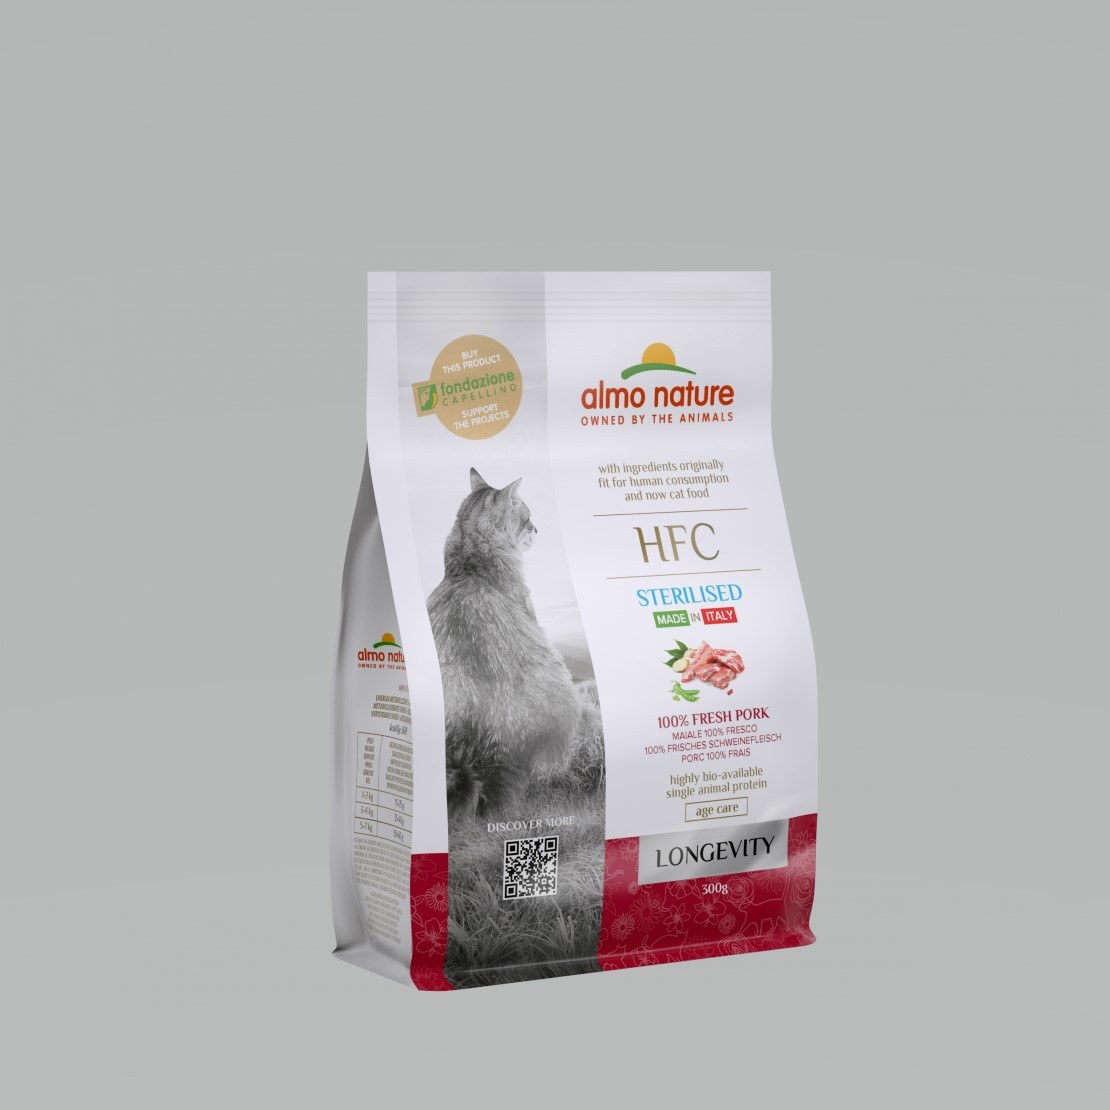 folkeafstemning nationalsang elevation Almo Nature Hfc Longevity Sterilized Cat Dry Food with 100% Fresh Pork